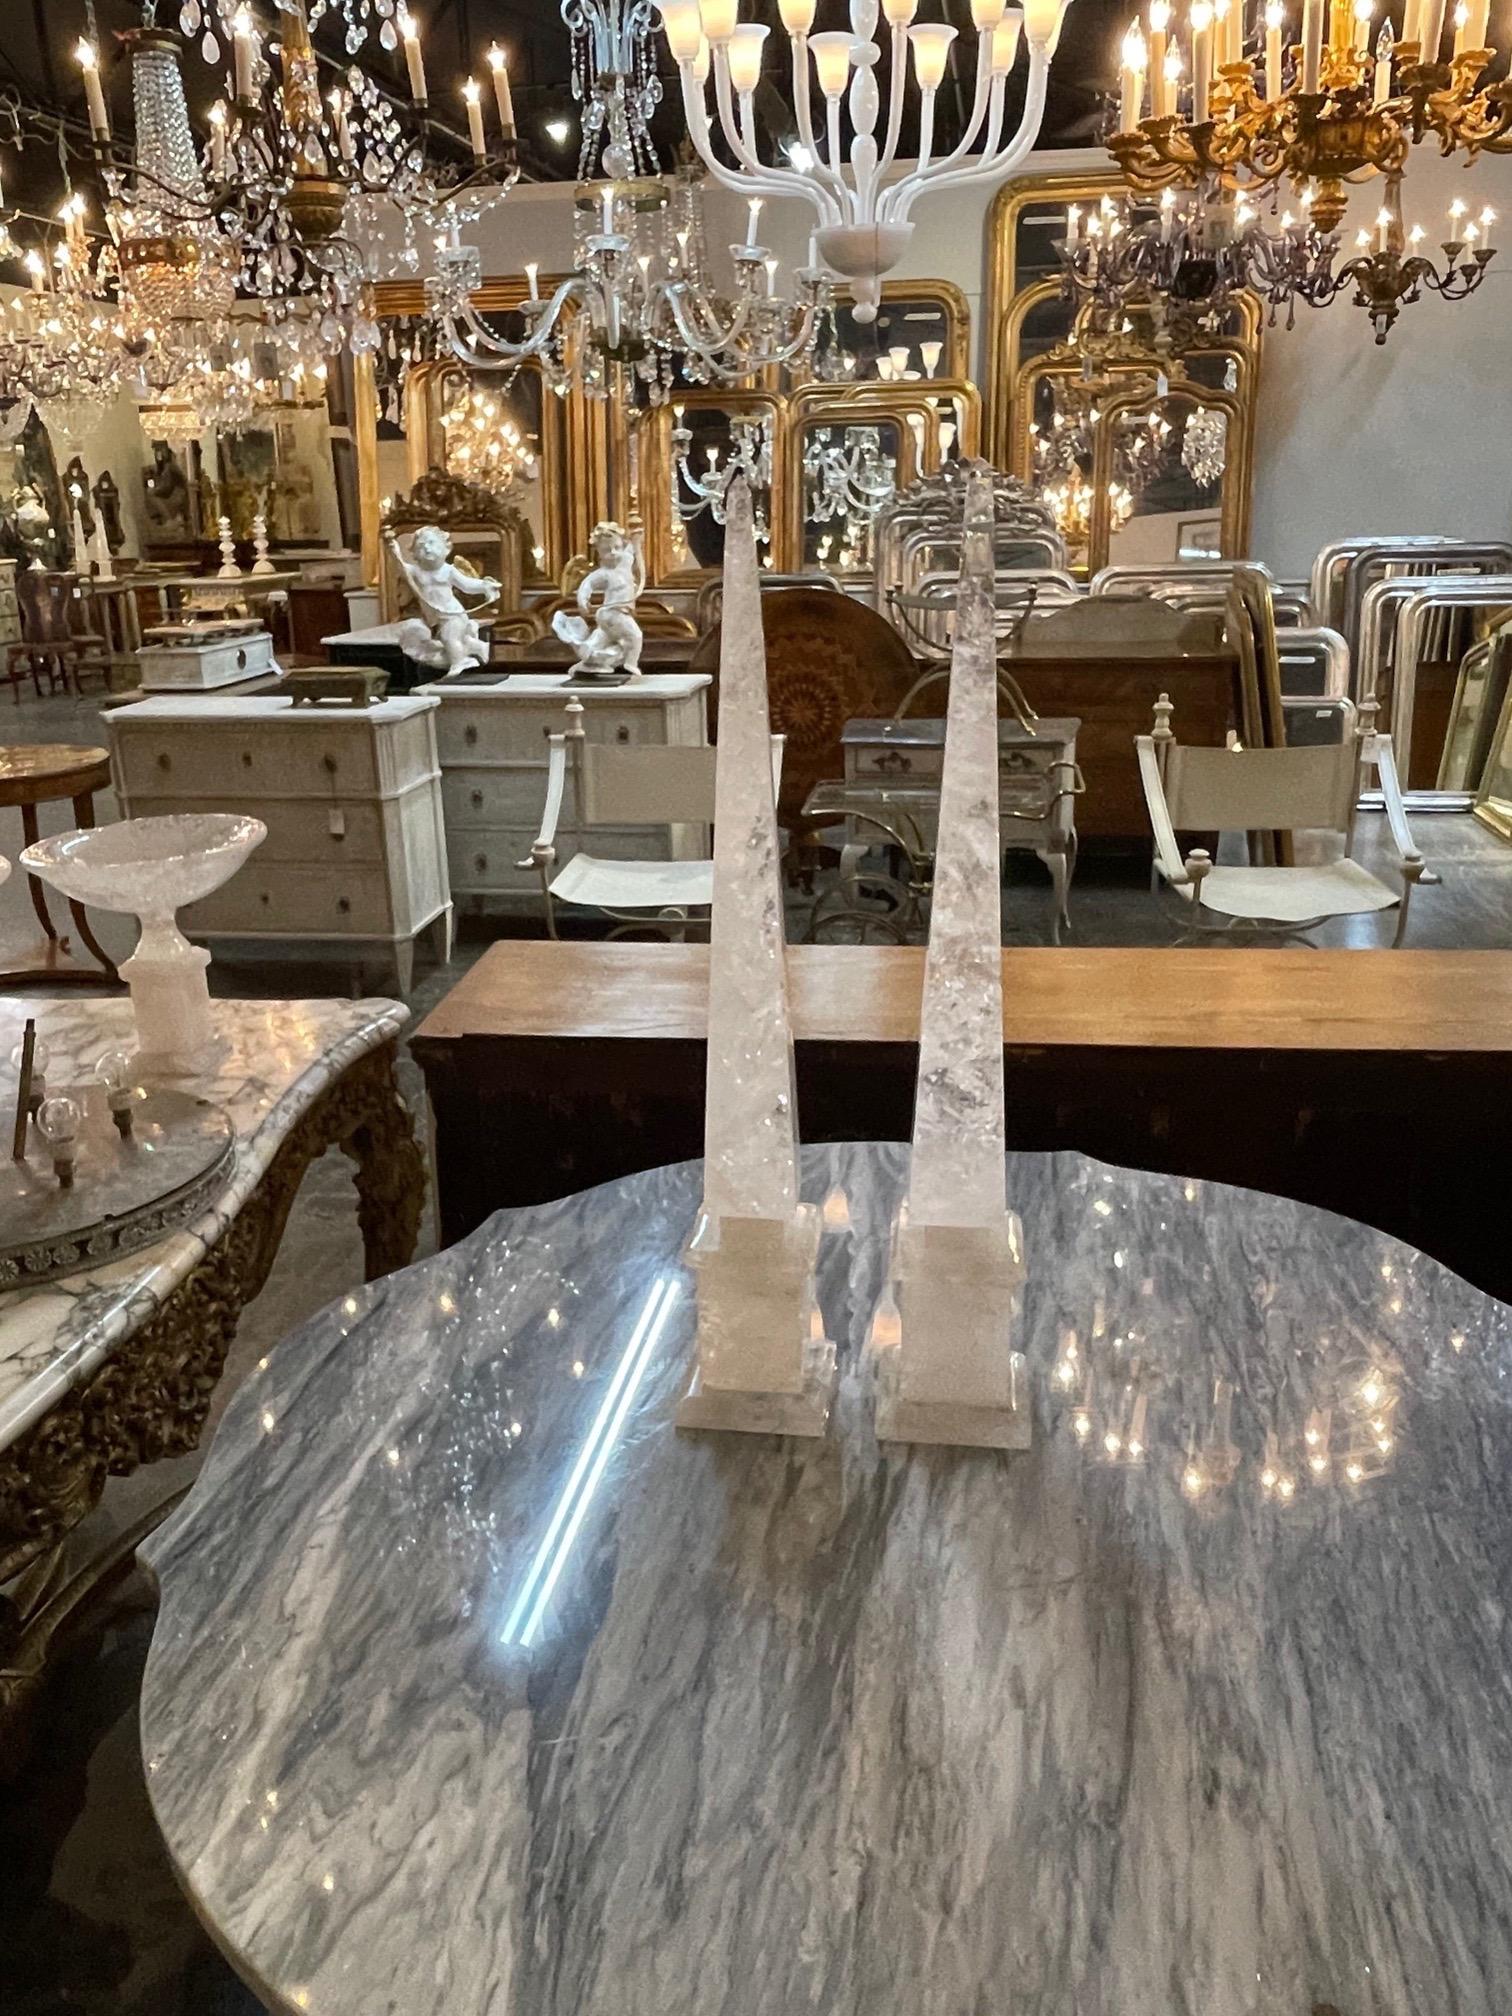 Very fine pair of polished rock crystal obelisks from South America. These are very fine quality and they make an impressive statement! A fabulous accessory.